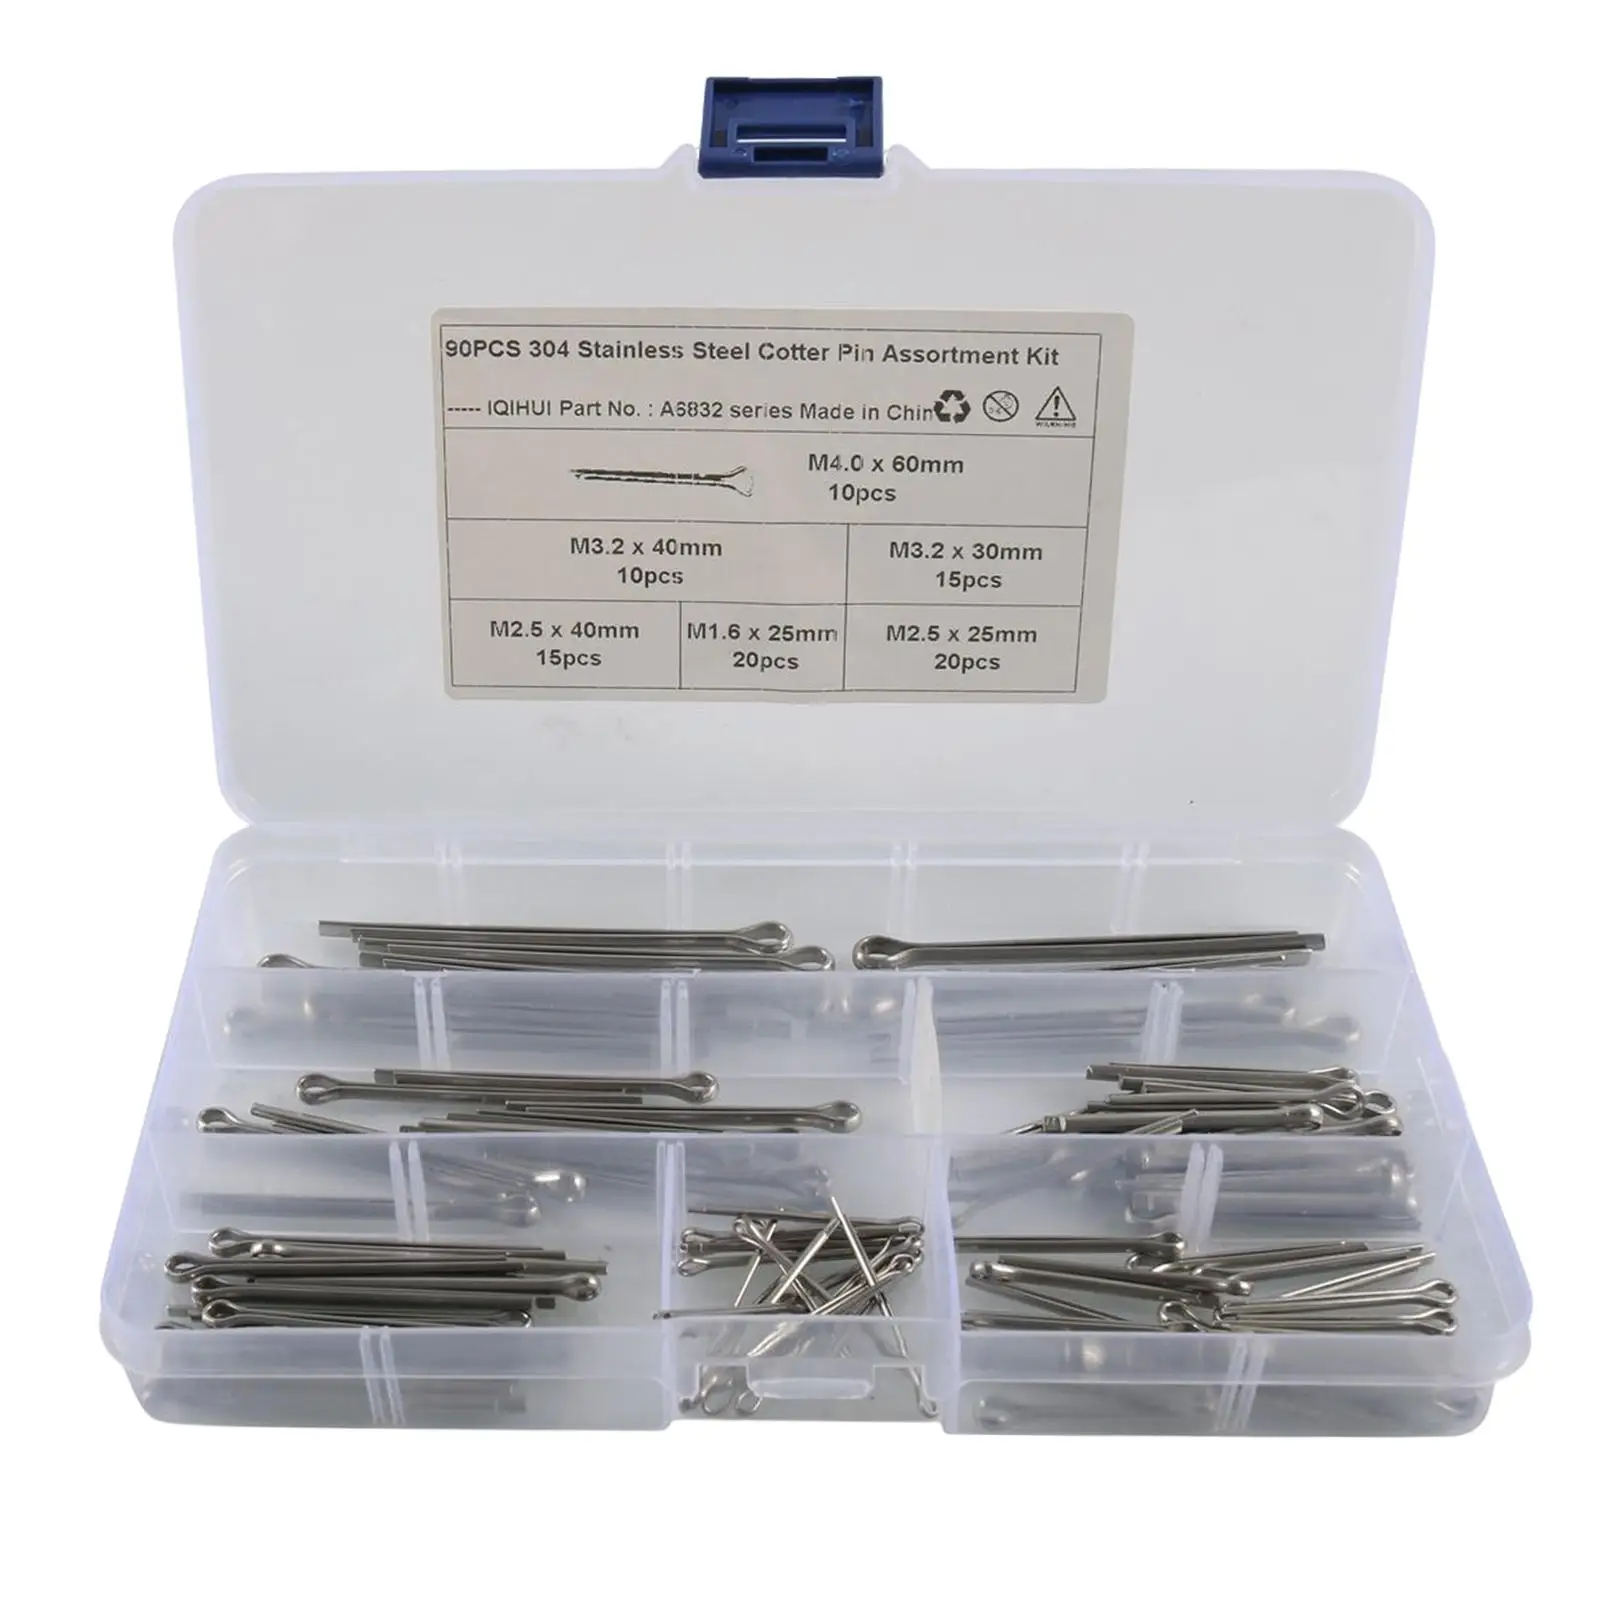 90x Cotter Pin Assortment Kit Assortment Tool with Container Box 304 Stainless Steel Cotter Pin Clip for Trucks Cars Workshops